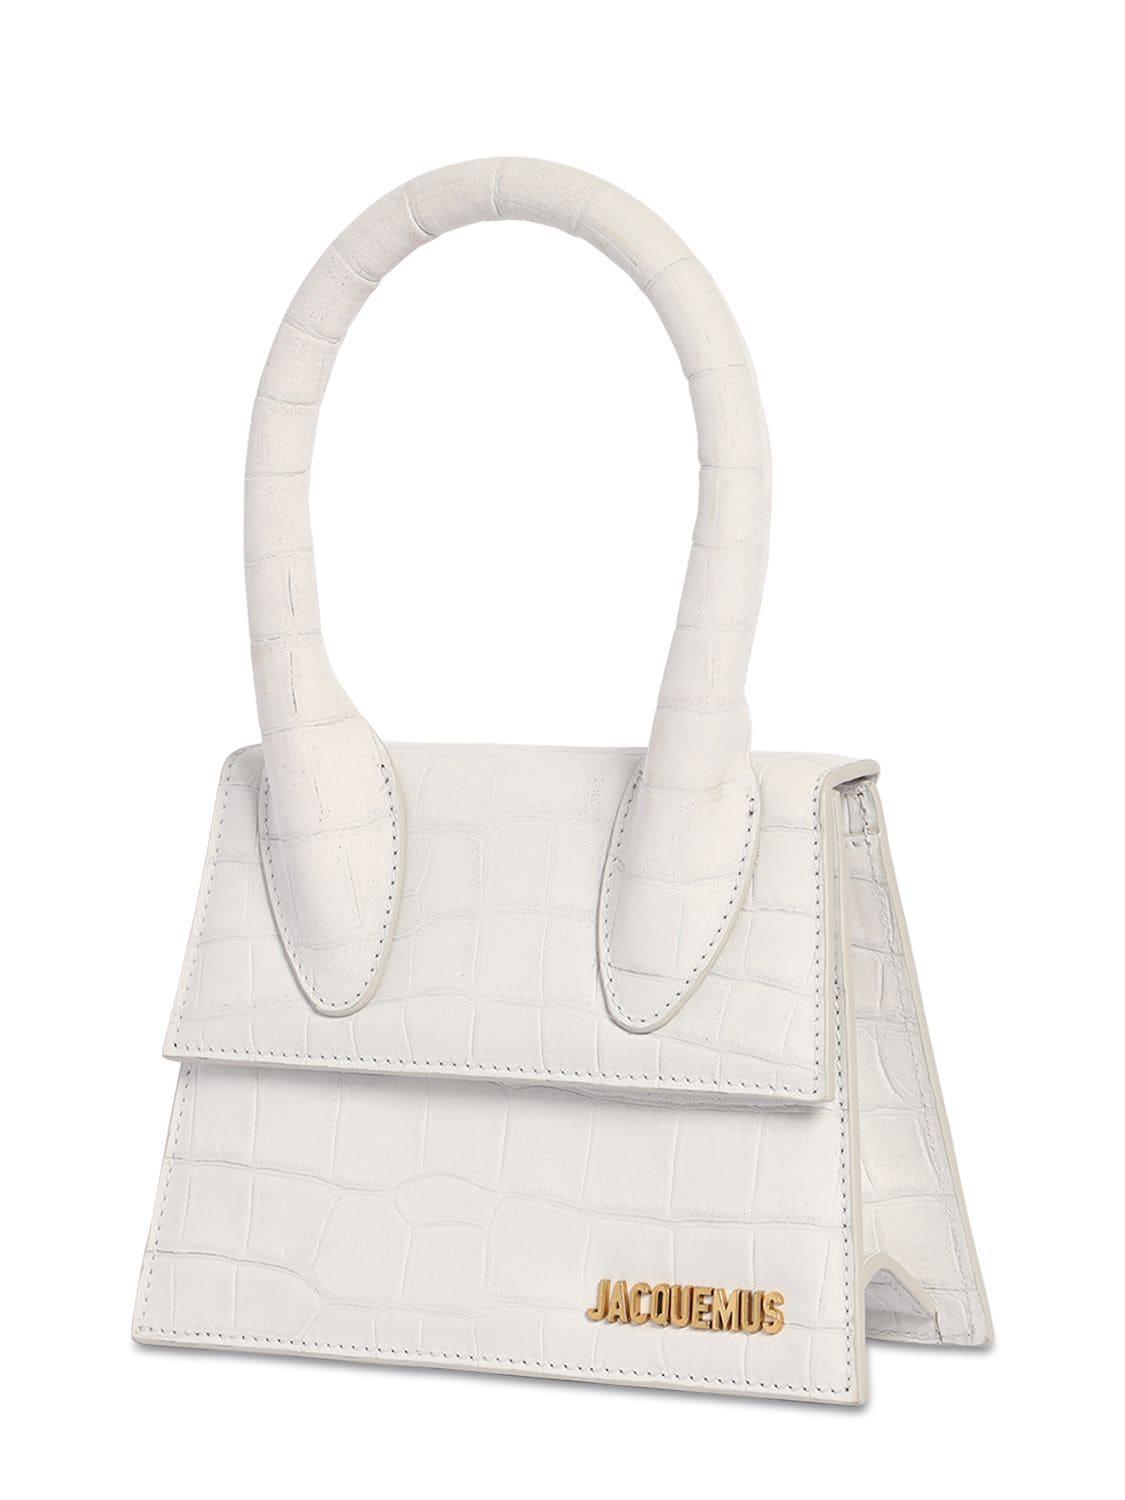 Jacquemus Le Chiquito Moyen Croc Embossed Bag in White | Lyst